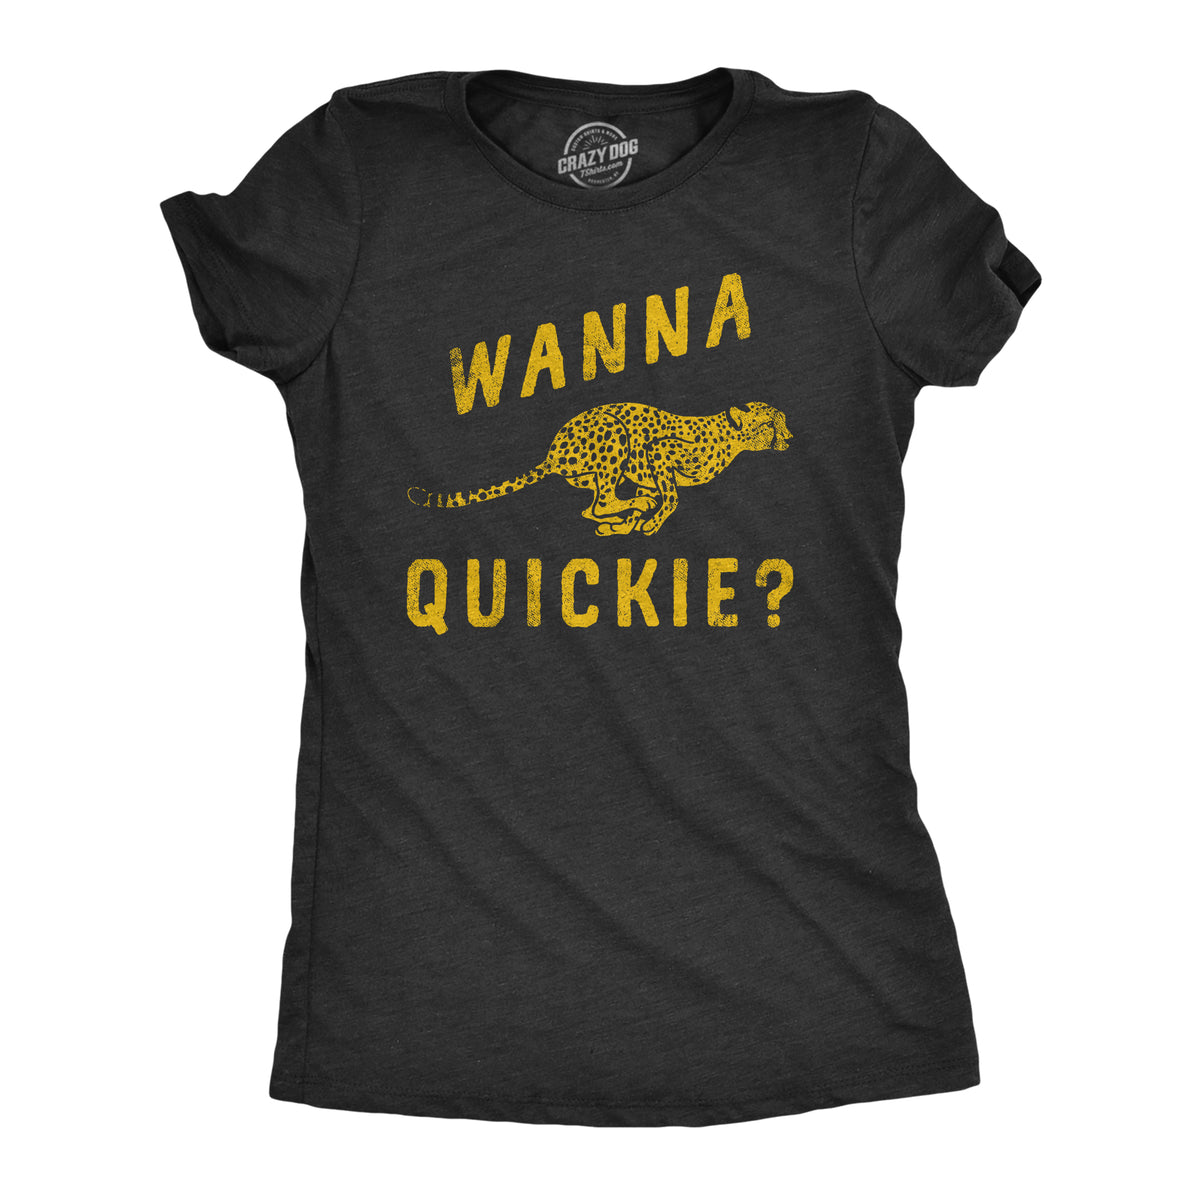 Funny Heather Black - QUICKIE Wanna Quickie Womens T Shirt Nerdy Sex sarcastic Tee